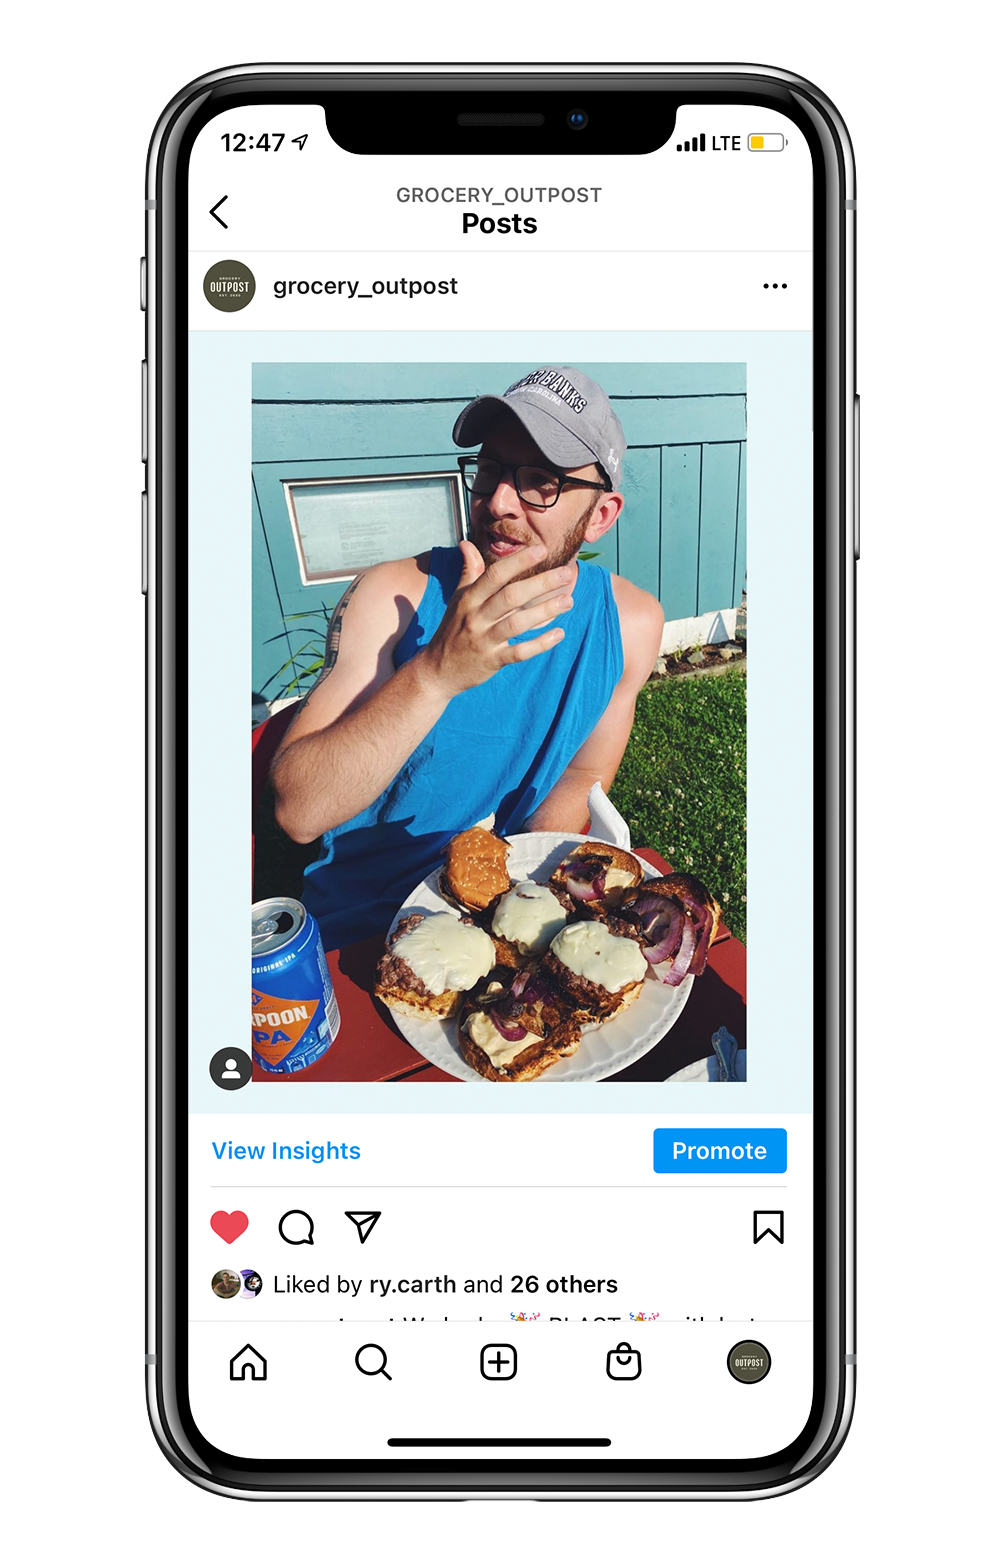 Instagram post showing a man in a blue tank top eating a hamburger.